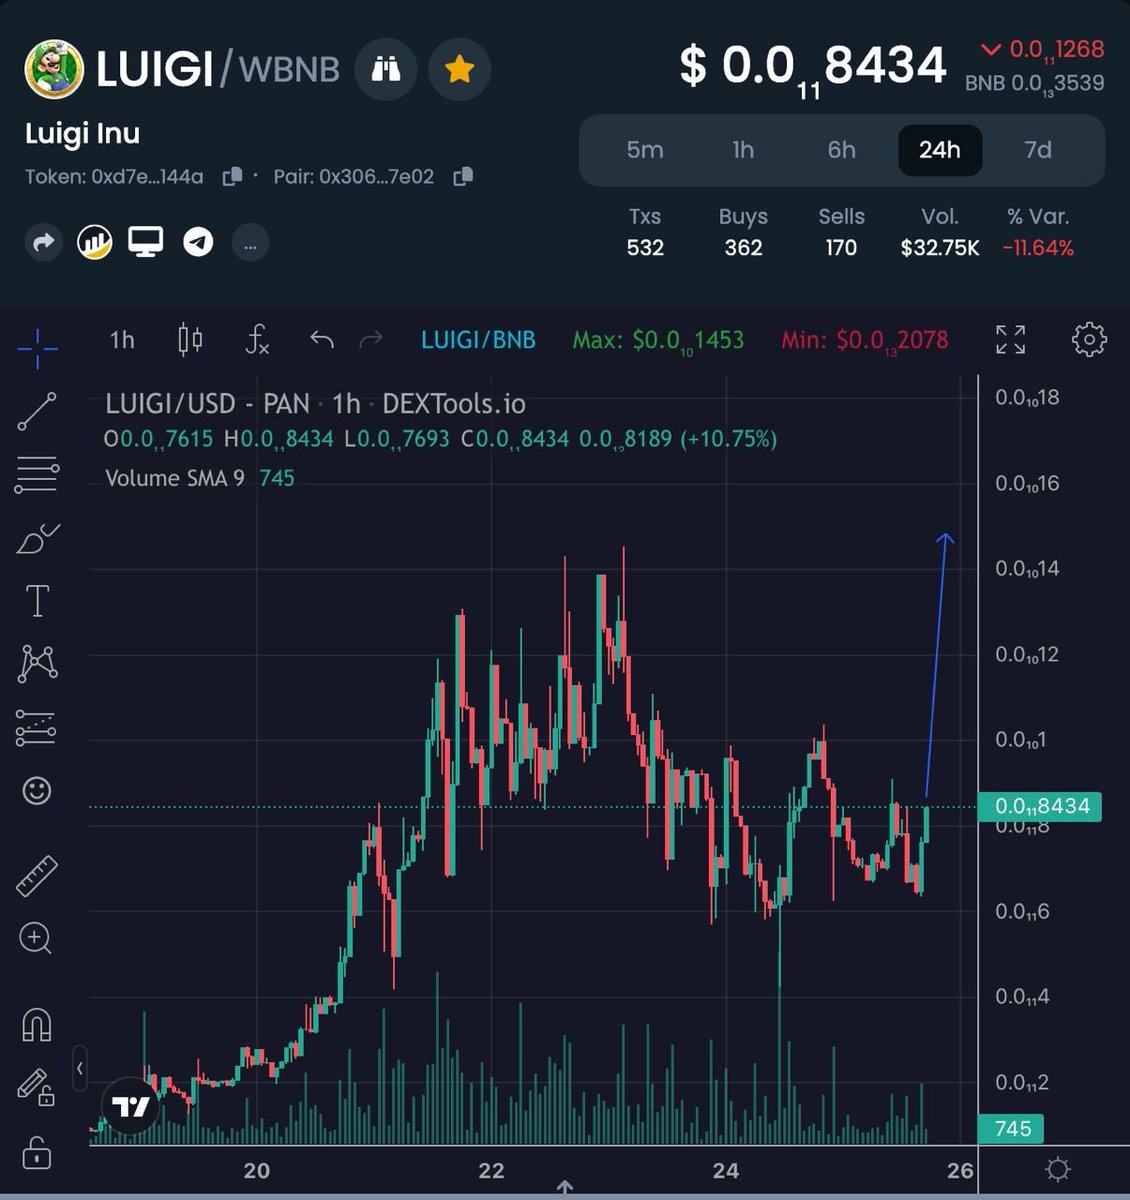 #LUIGIINU  Alright im not gonna lie i have been watching how this team working to gain every support possible in the space im vouching out right now as habibi this one will do better then pepe #bscgem #ElonMusk 

telegram t.me/LuigiInuBSC
Poocoin poocoin.app/tokens/0xd7e81…